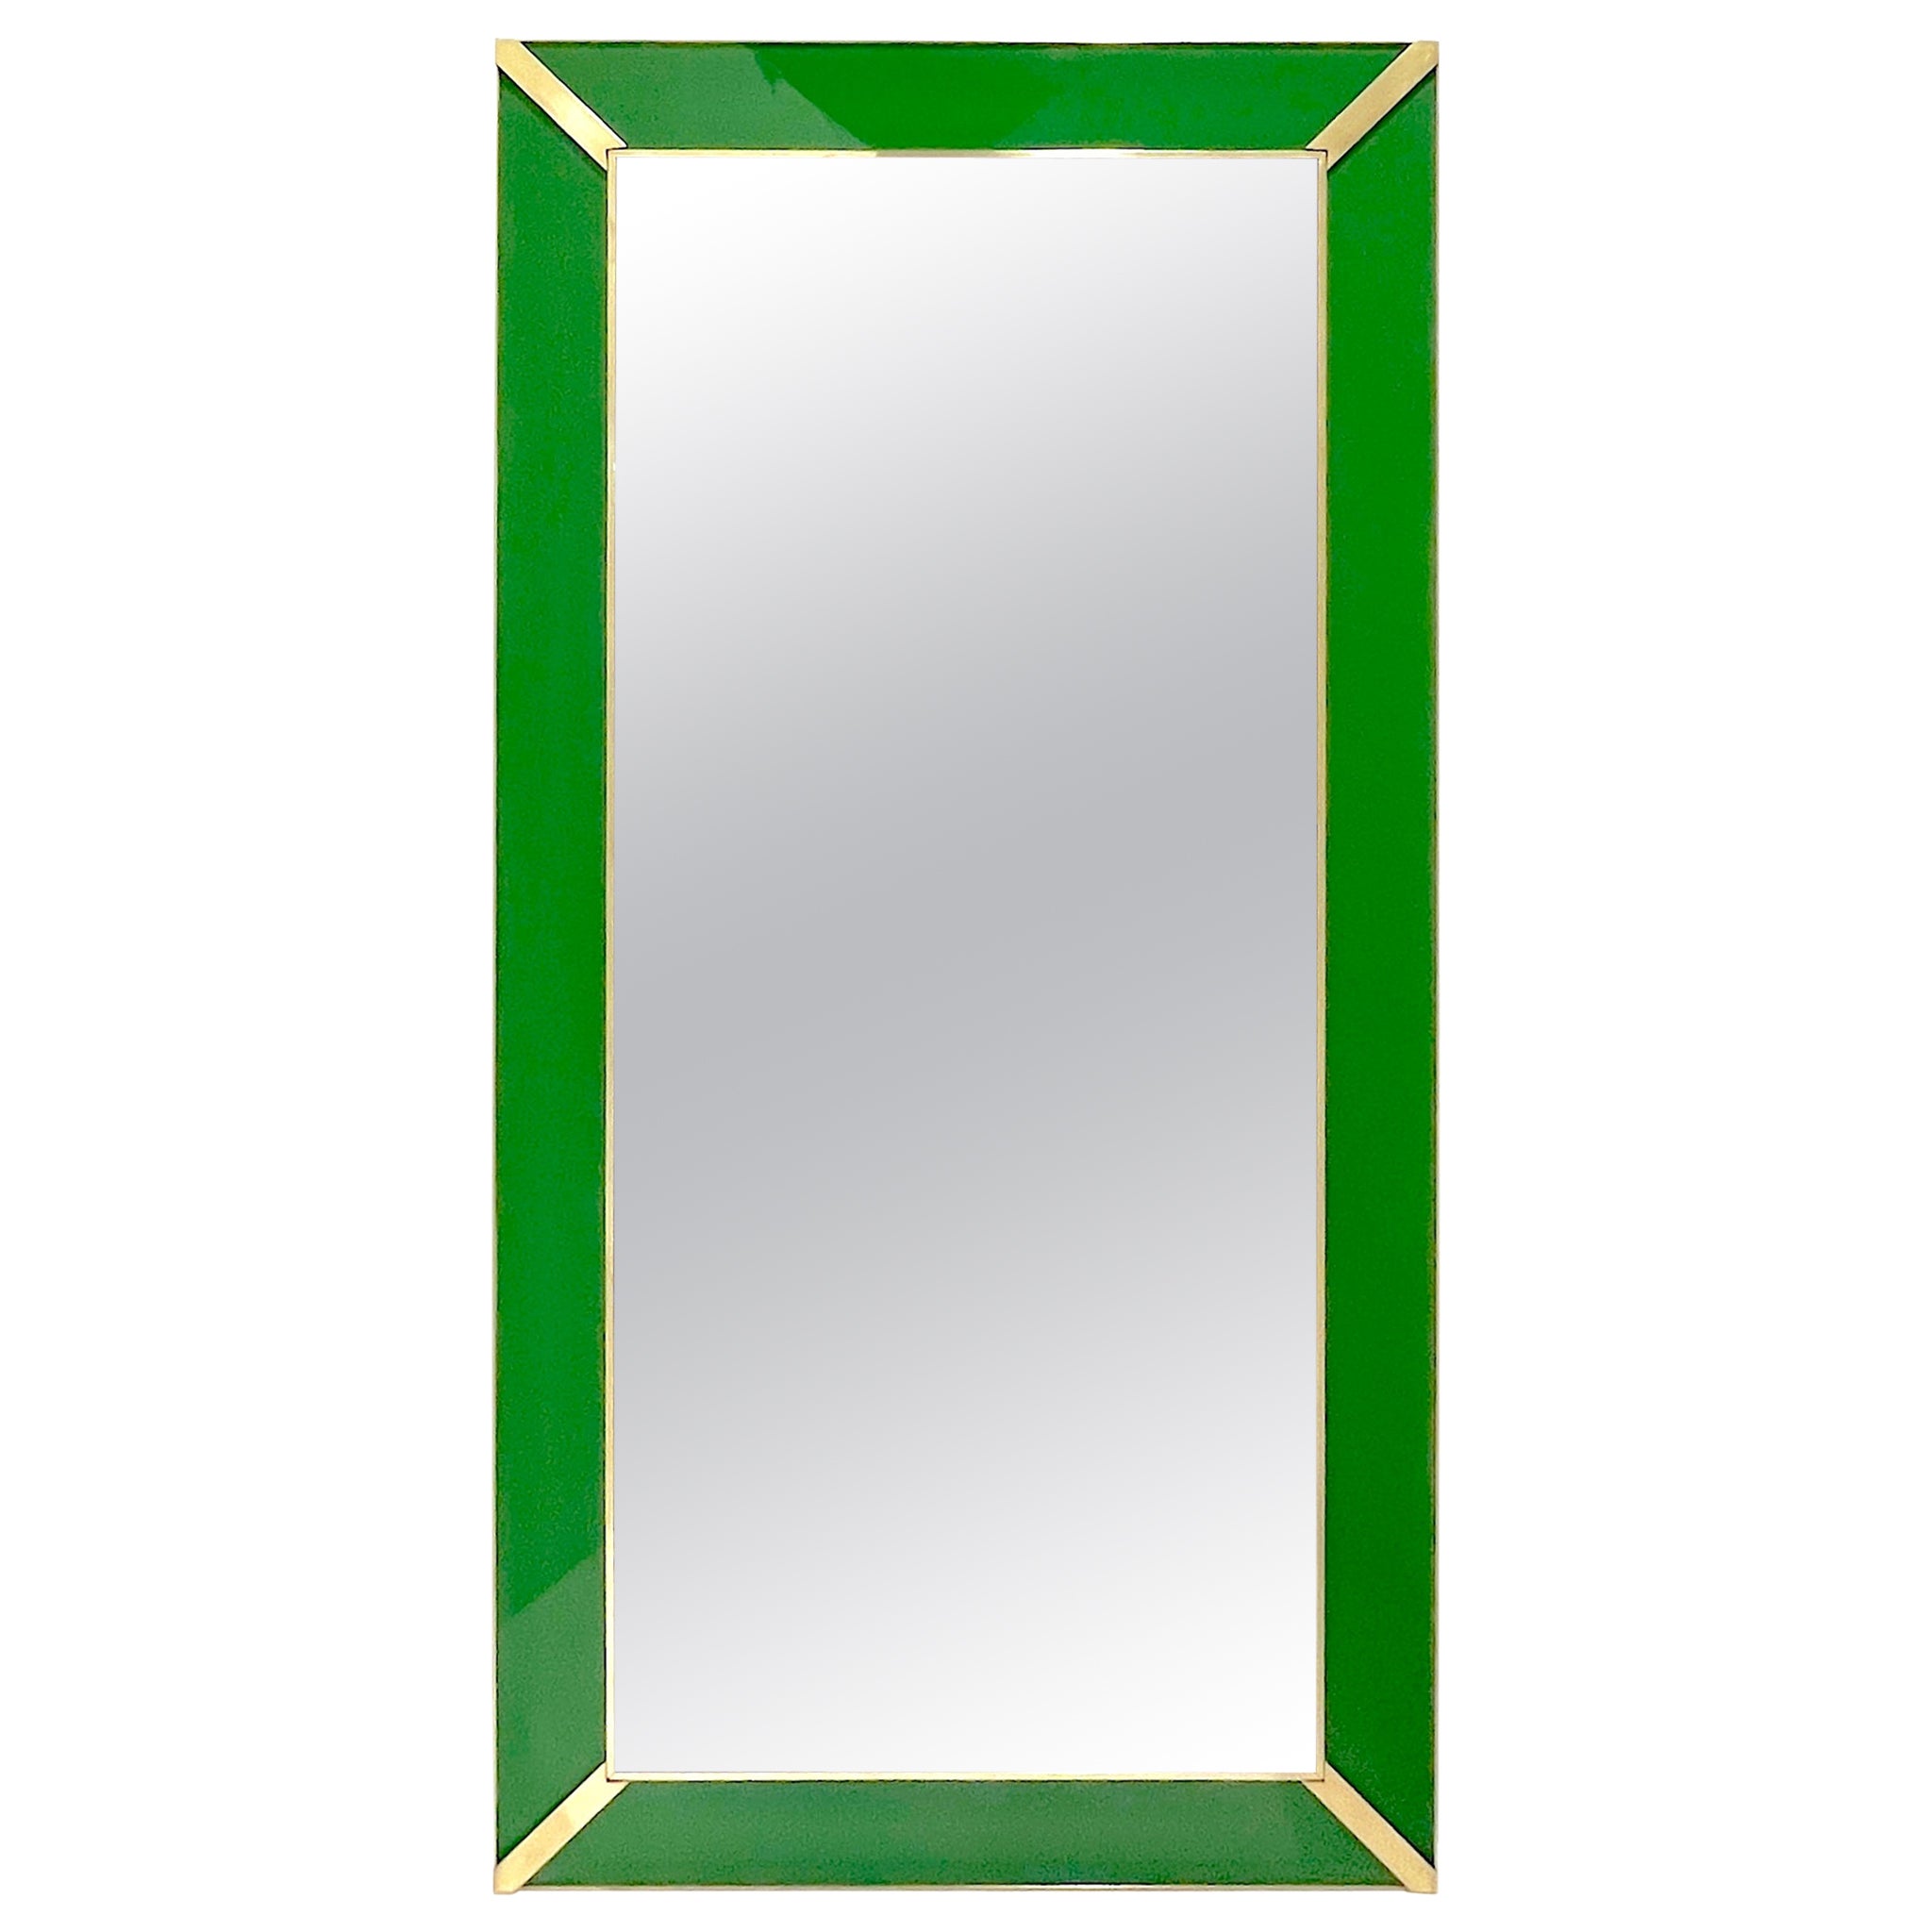 Contemporary Italian Minimalist Design Green Glass Mirror with Brass Accents For Sale